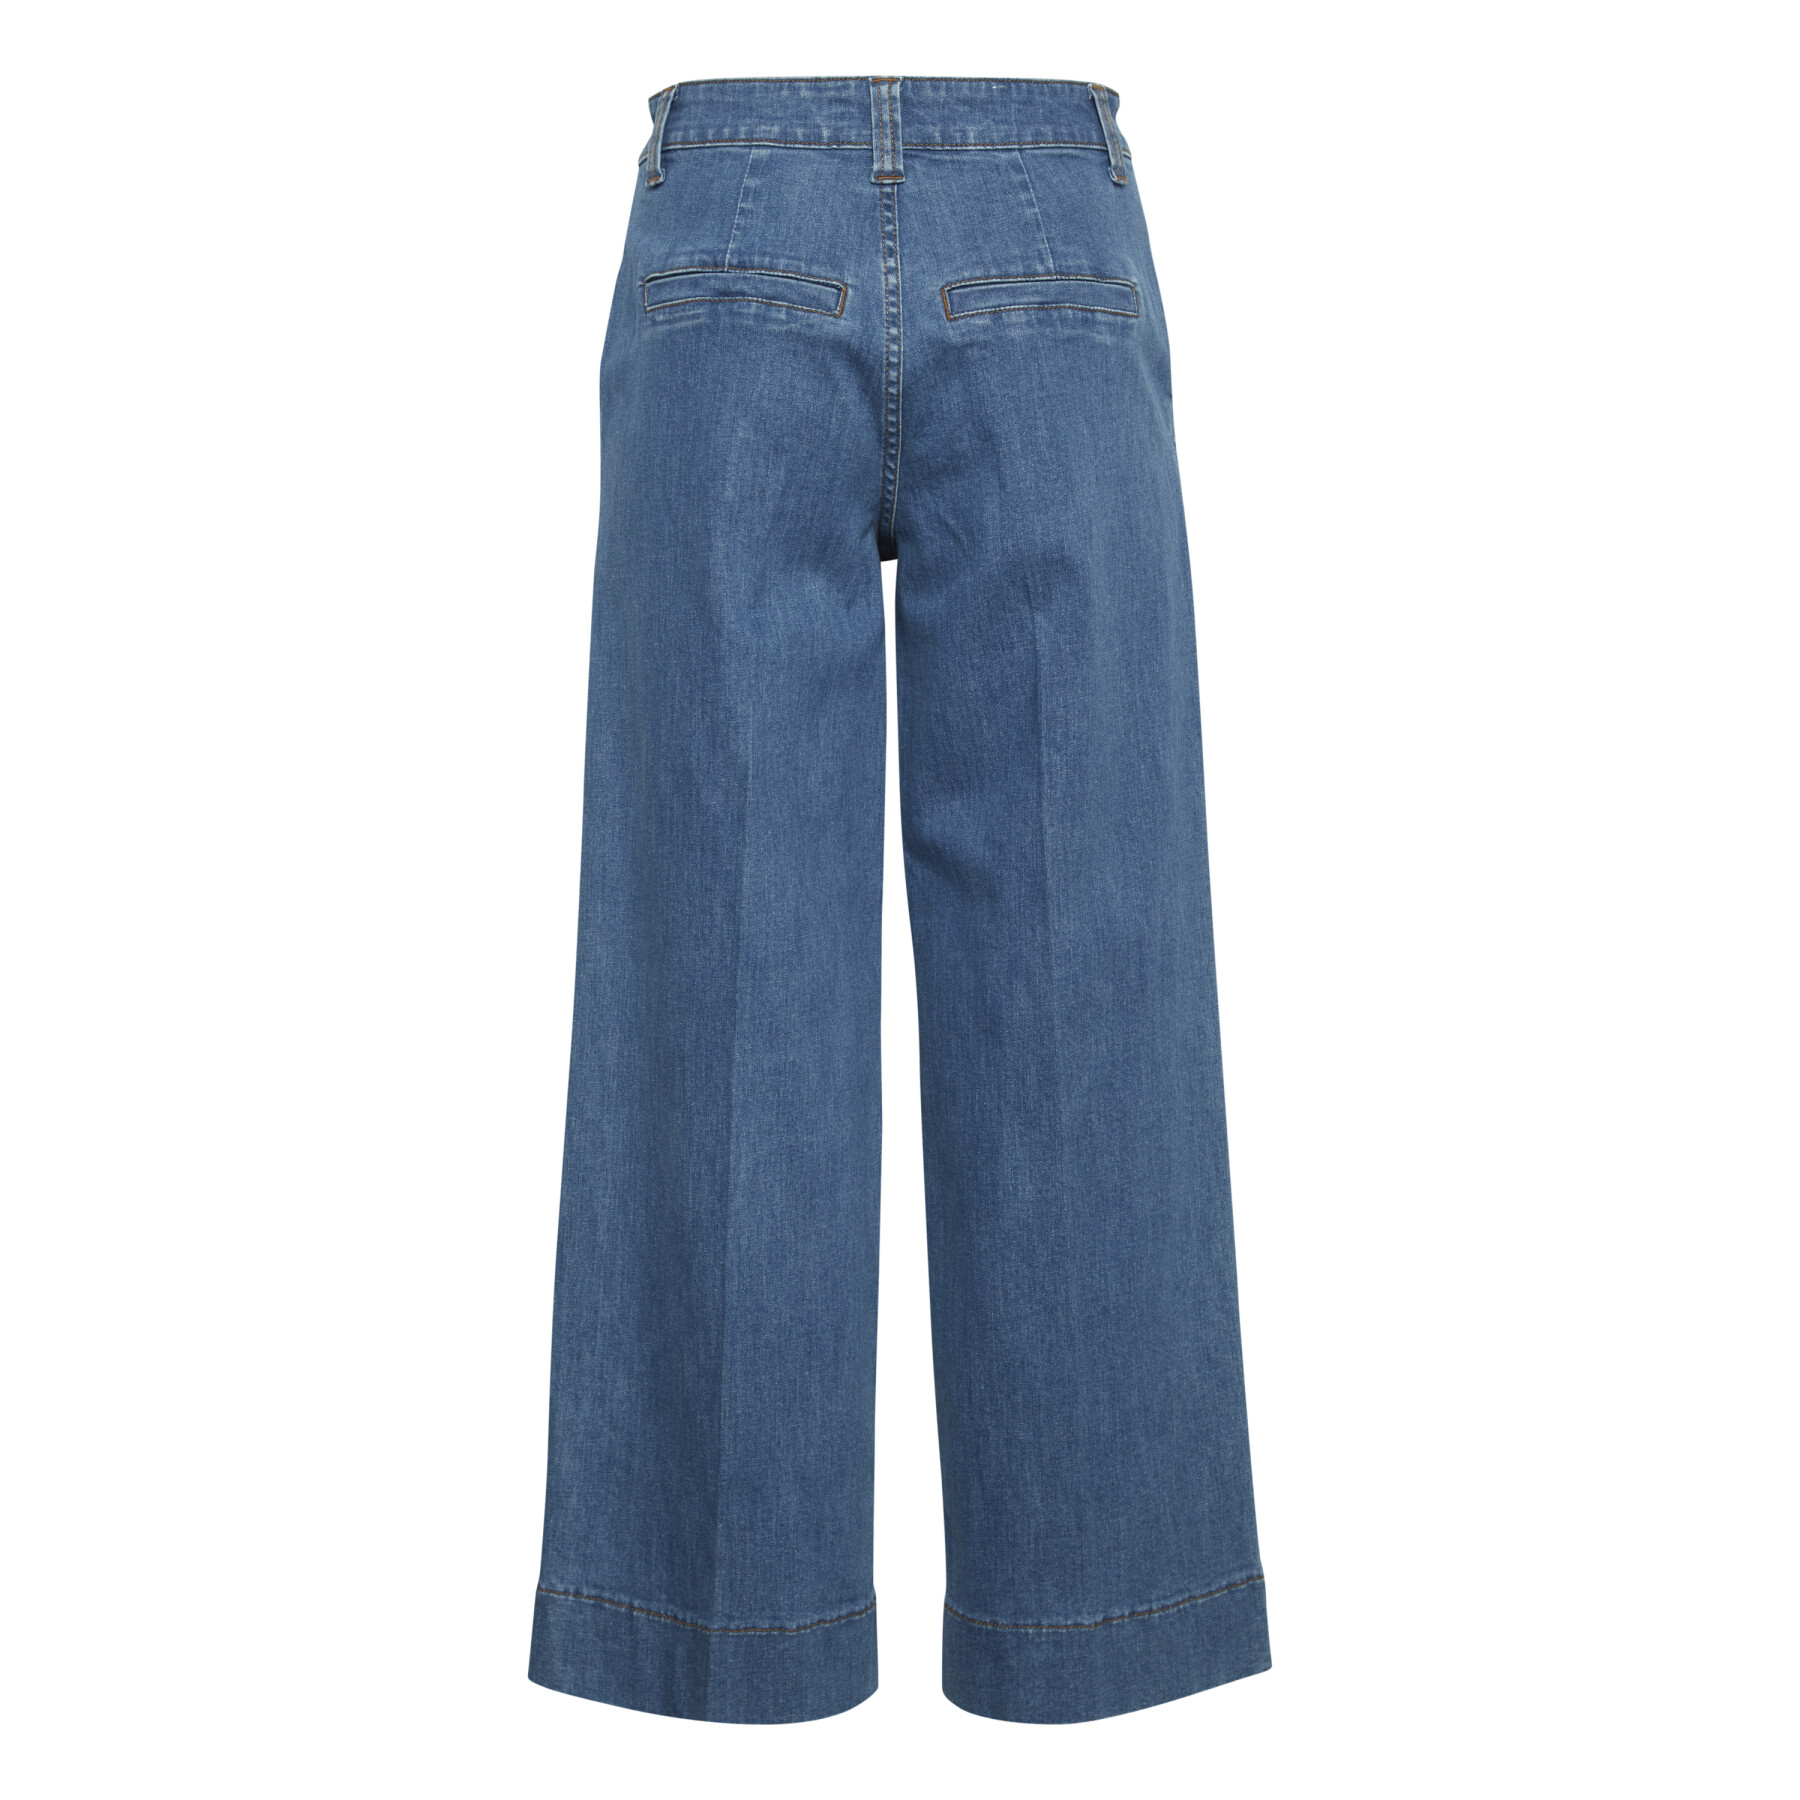 Women's jeans b.young Kato